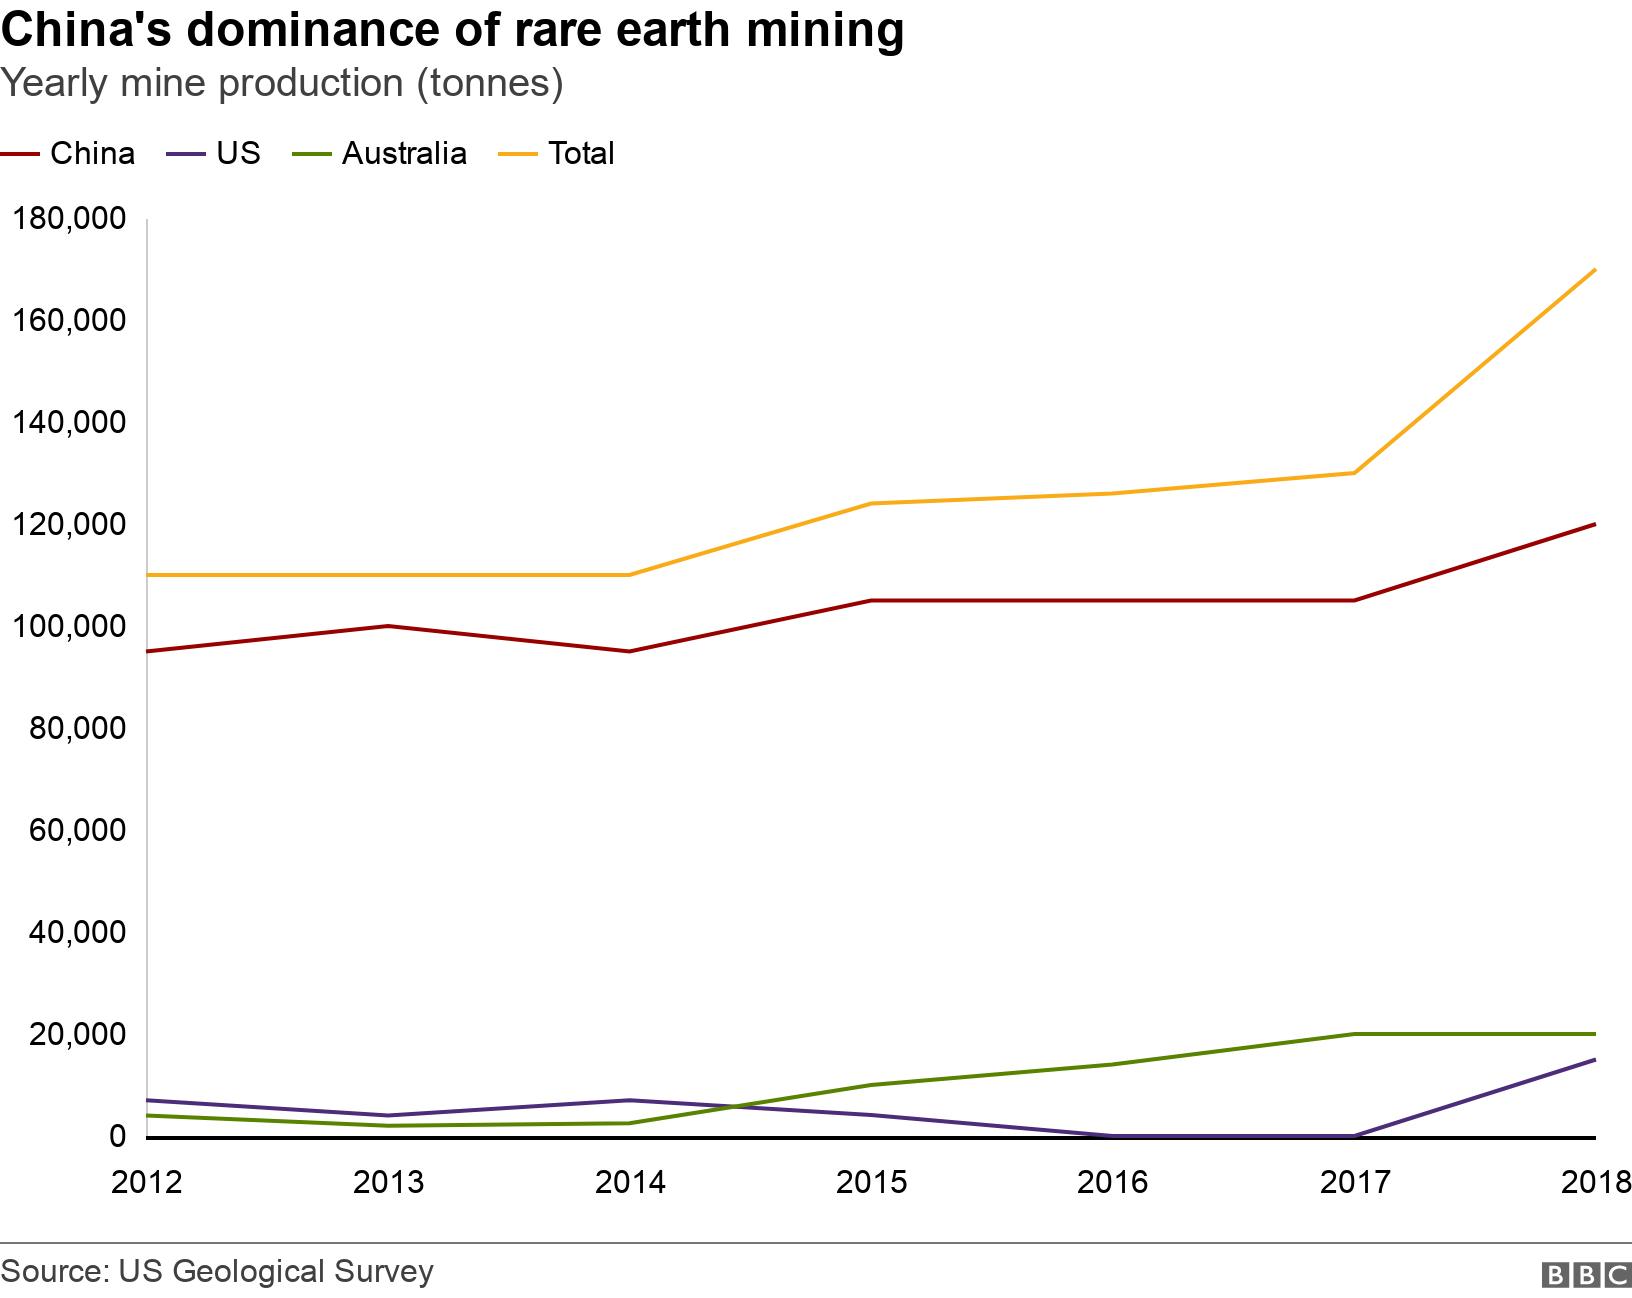 Are rare earth minerals China's trump card in its trade war with US?